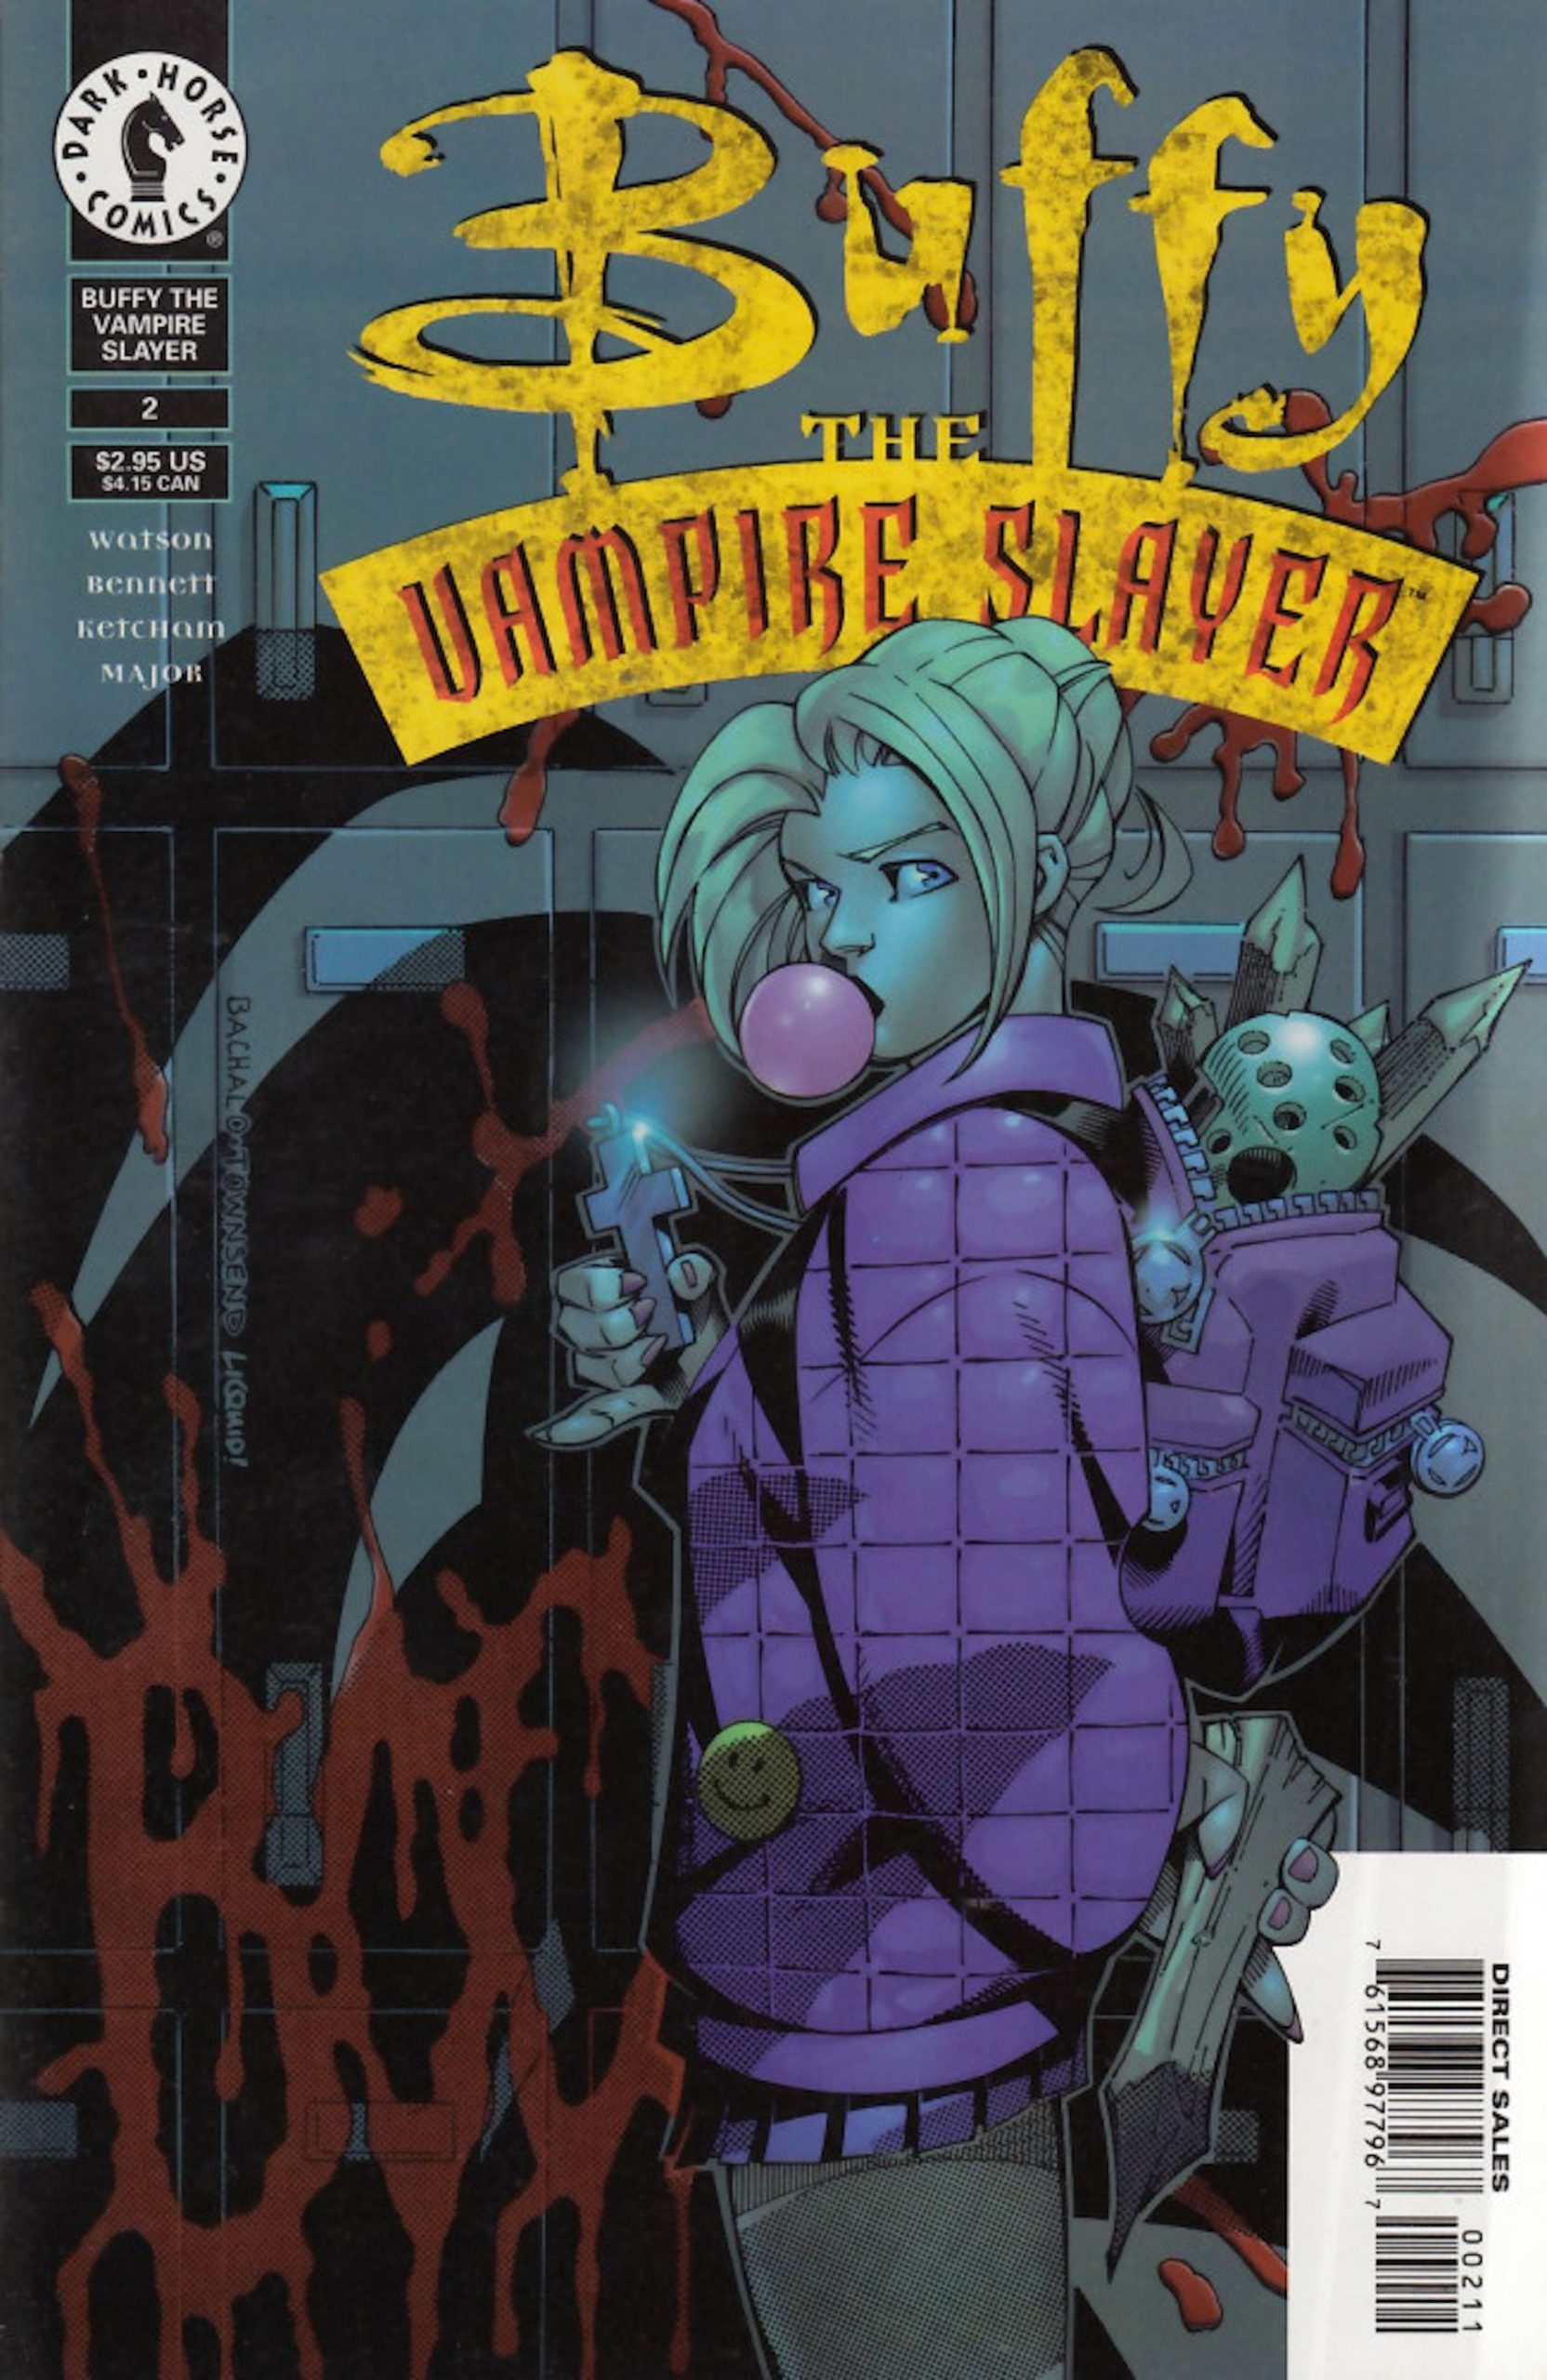 This image is the cover of Buffy The Vampire Slayer Classic #2 (1998), where Buffy can be seen holding a cross and chewing bubble gum by a bunch of bloody lockers. 